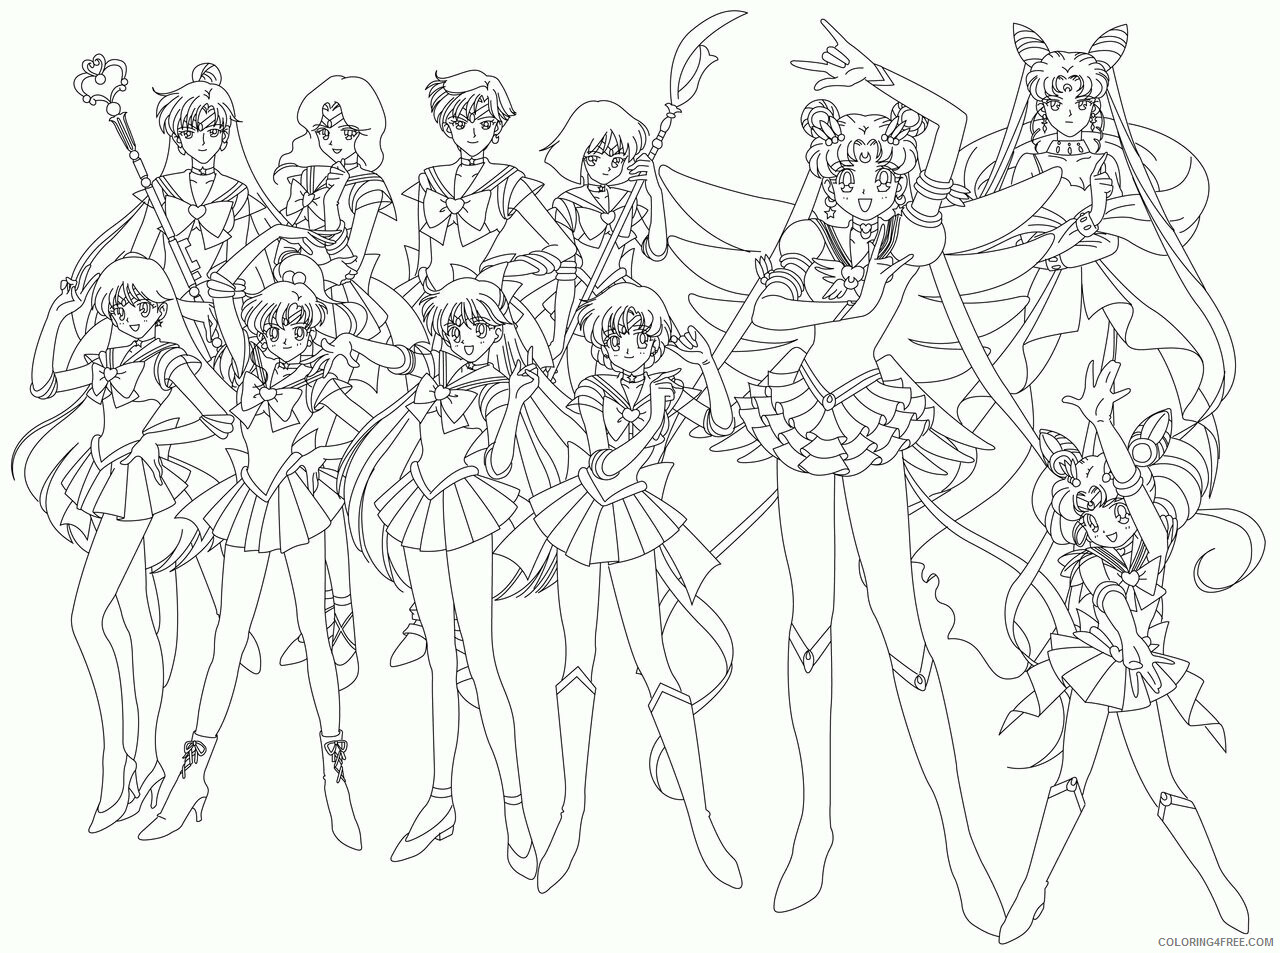 Anime Girls Group Coloring Page Printable Sheets DeviantArt More Like Anime 2021 a Coloring4free